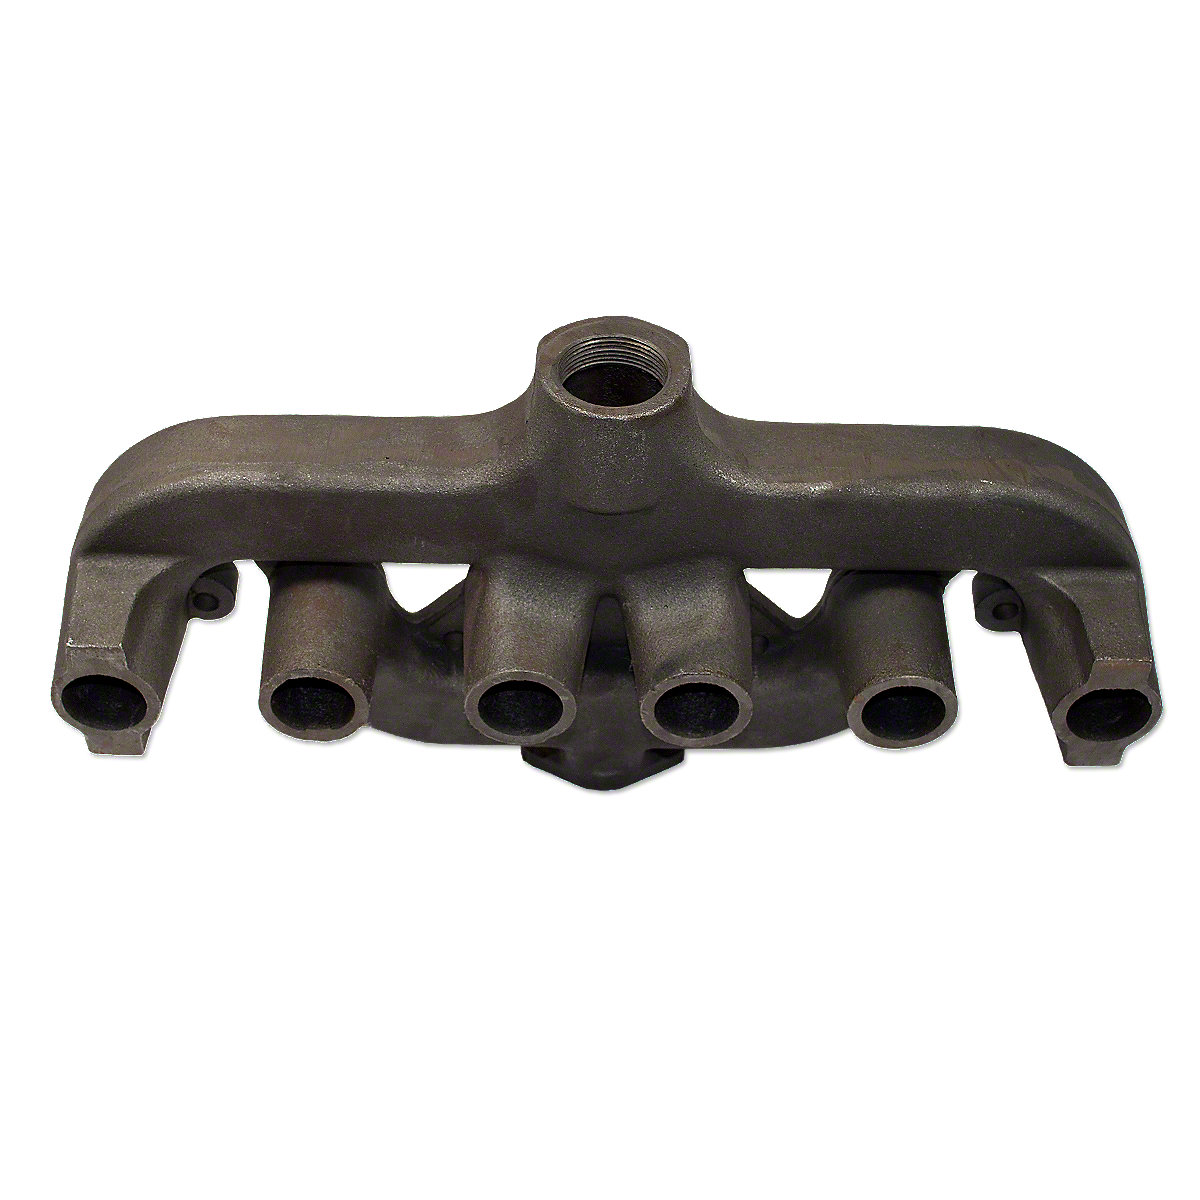 Manifold for Allis Chalmers Wd45 WD WC D17 Gas for sale online 